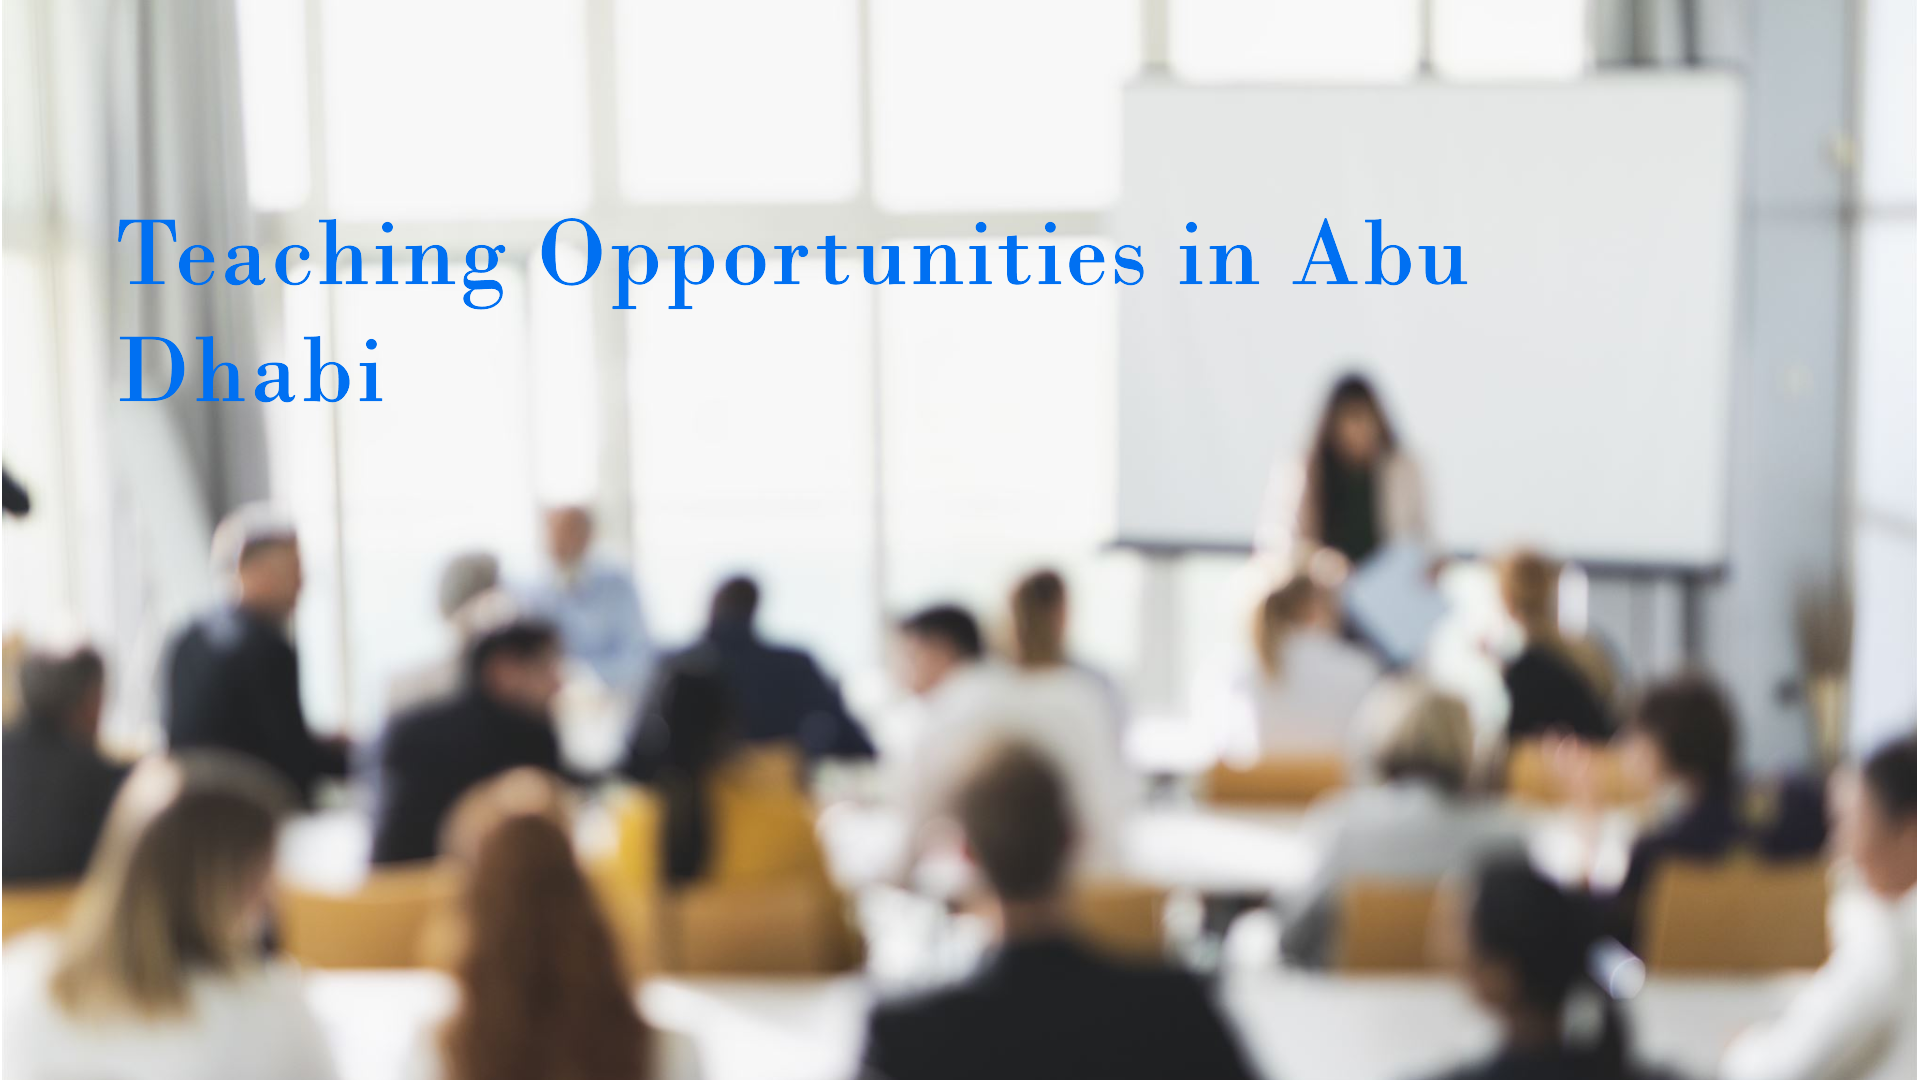 teacher jobs in abu dhabi for all nationalities with salary 5,000 to 6,000 AED